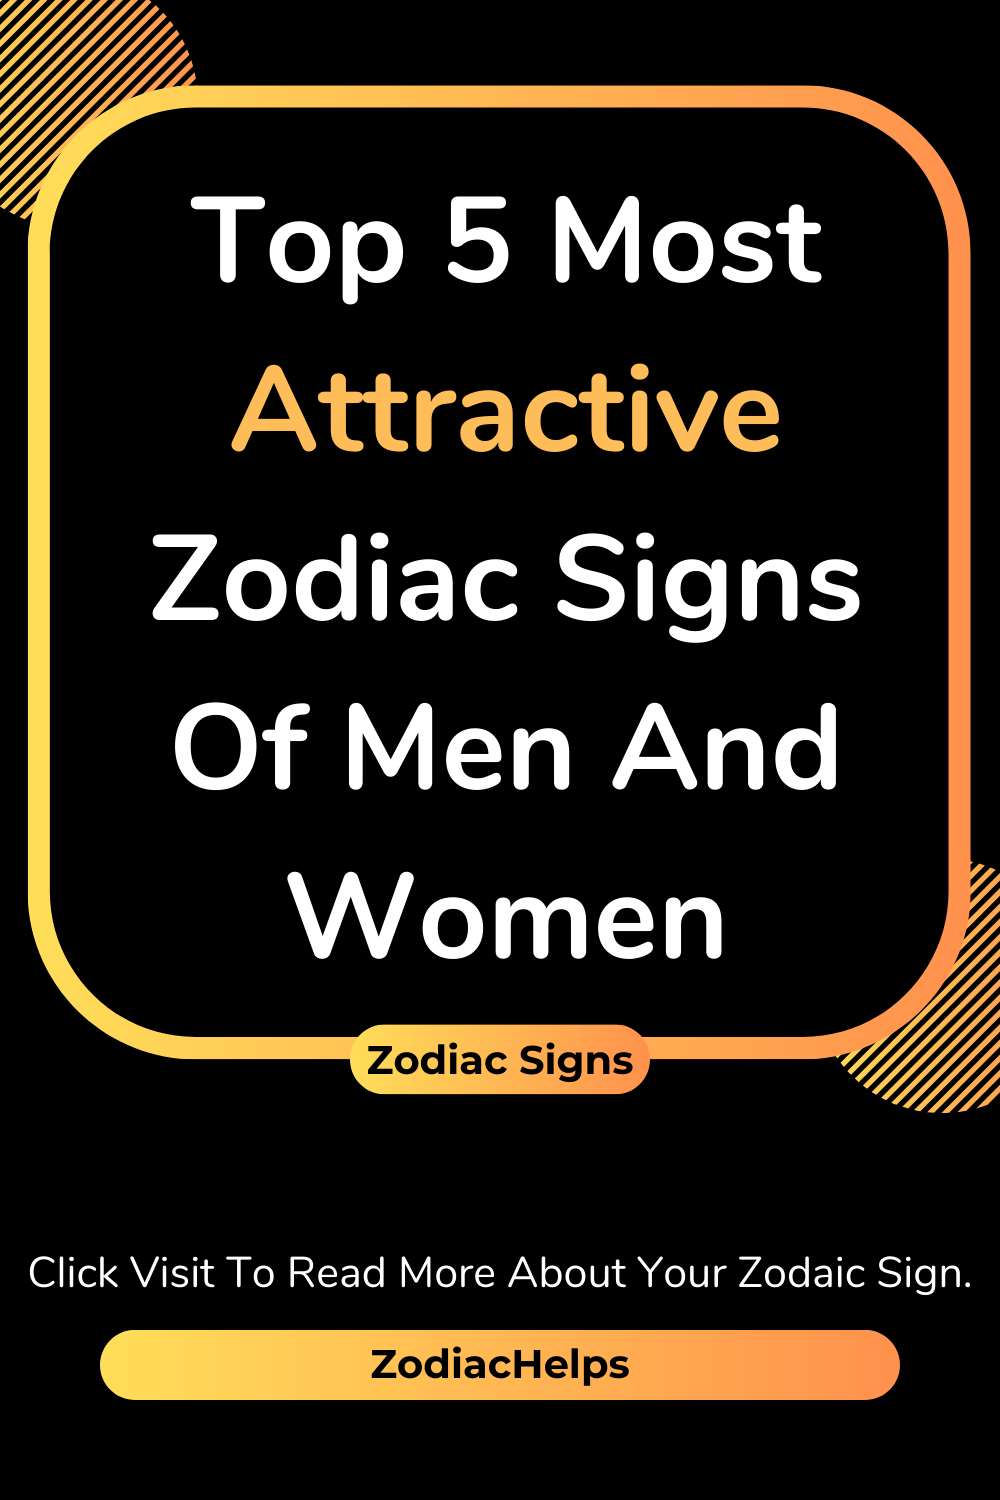 Top 5 Most Attractive Zodiac Signs Of Men And Women